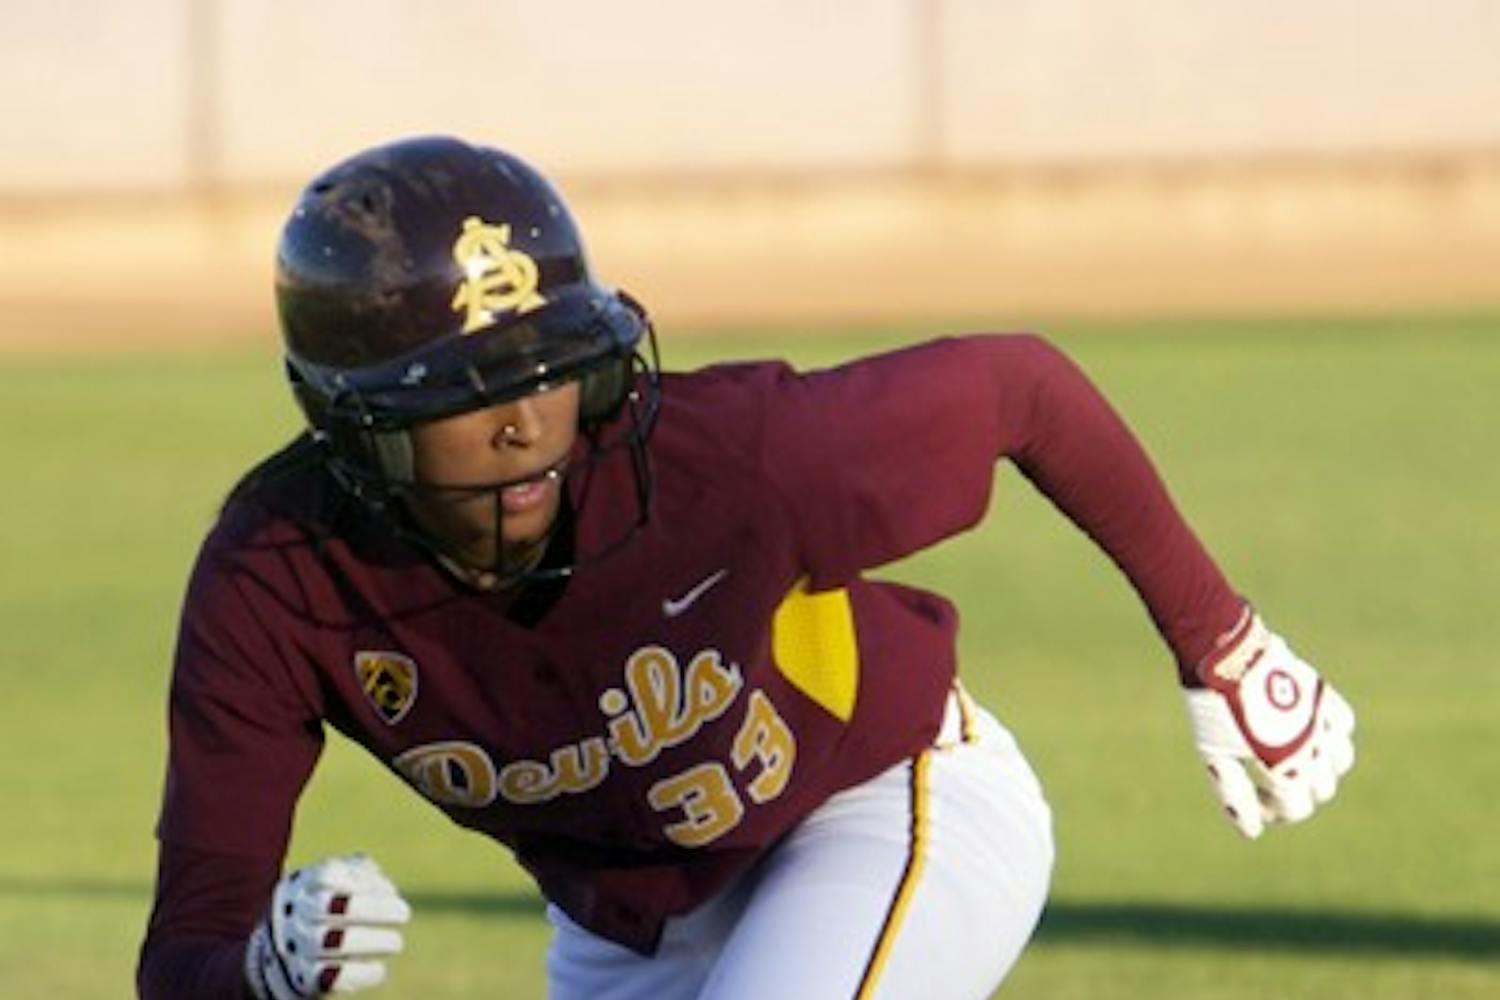 Prepared to Run: ASU freshman outfielder Alix Johnson gets ready to take off from second base during the Sun Devils’ victory over Cal Poly on Feb. 11. ASU will play five games in three days at the Wilson/DeMarini Invitational in Tempe starting March 4. (Photo by Scott Stuk)